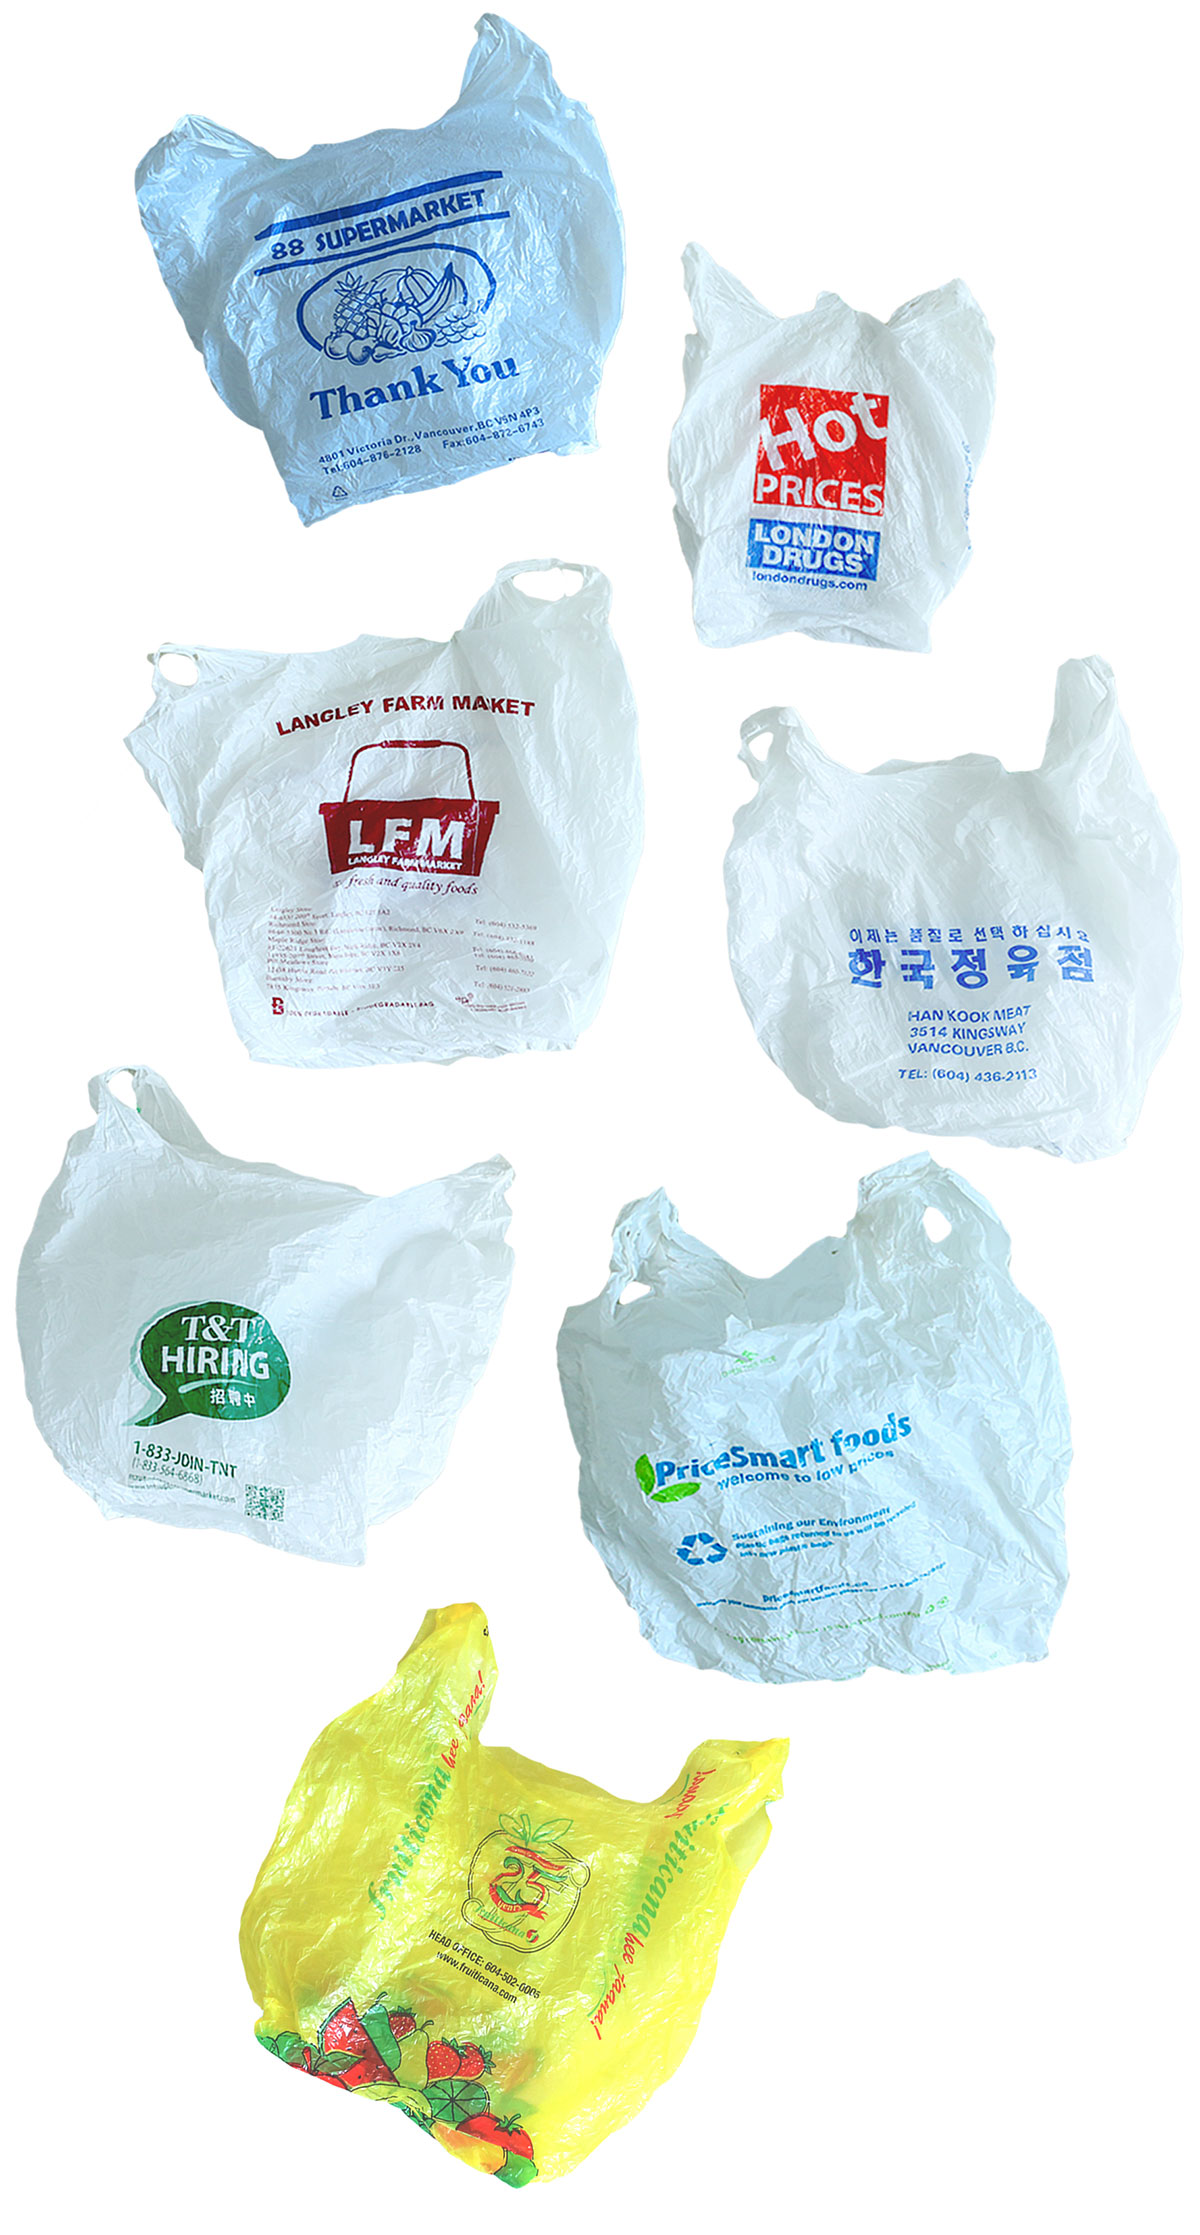 A selection of light-coloured grocery bags, with one yellow bag at the bottom of the frame, against a white background.